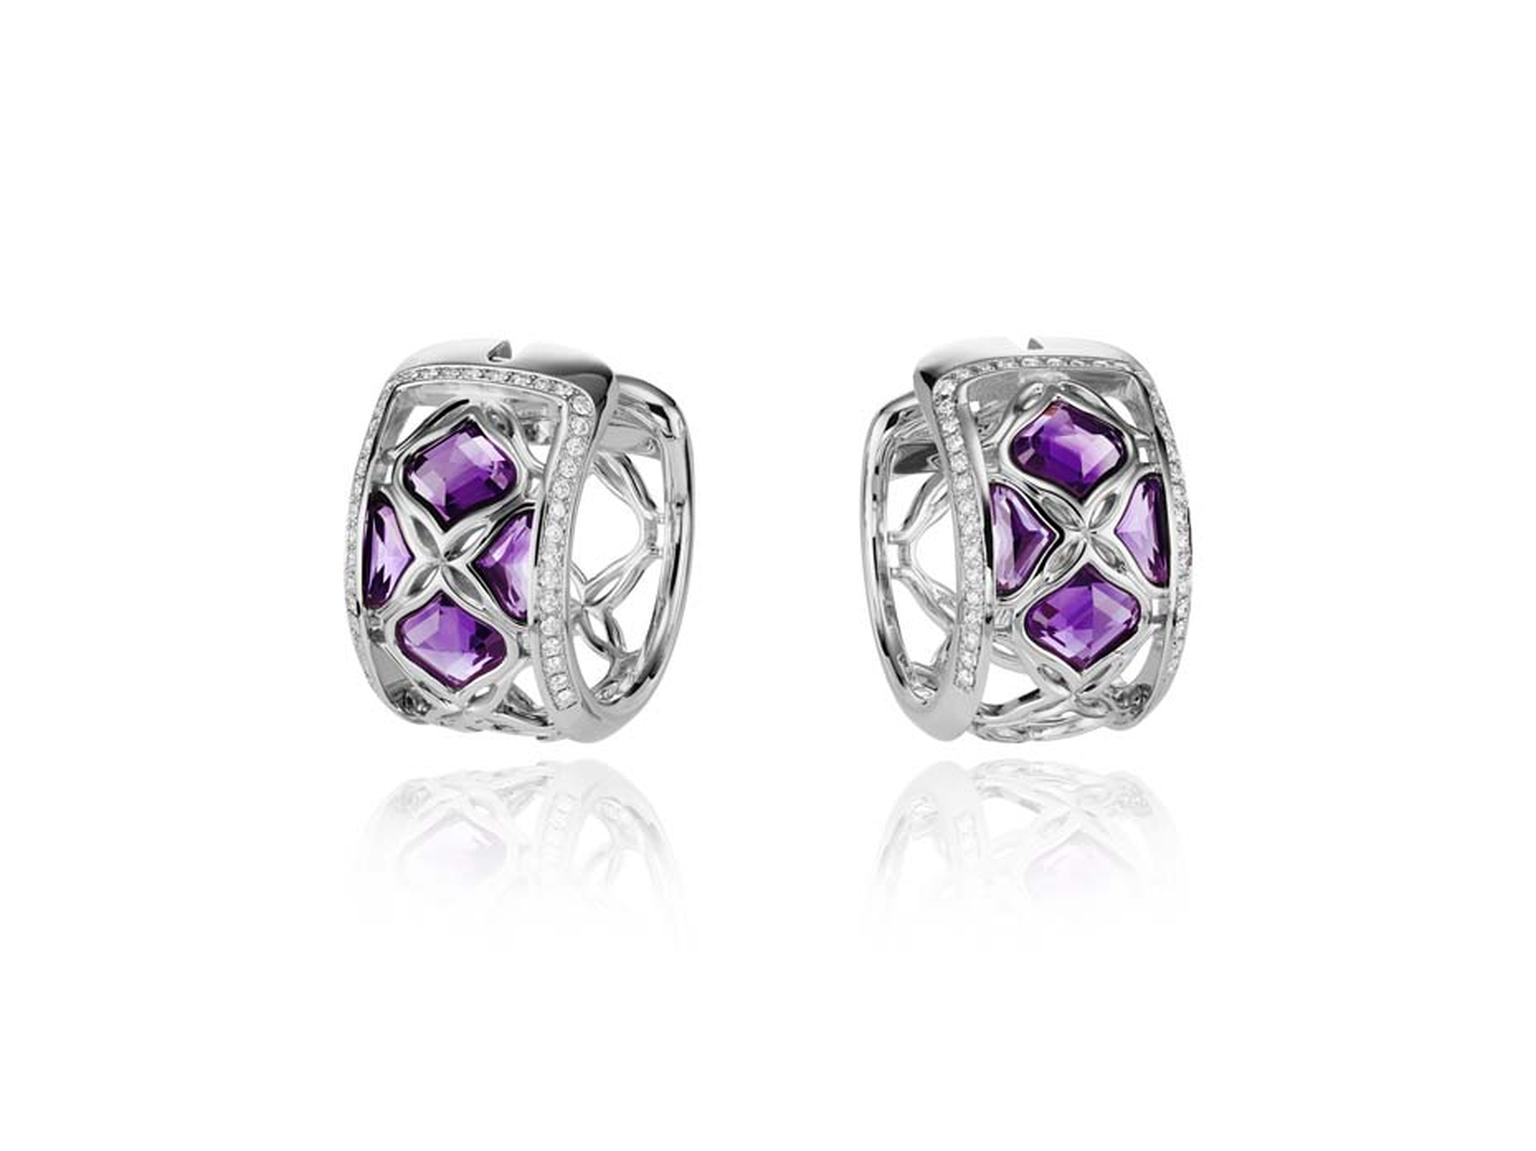 Chopard Imperiale earrings featuring faceted amethysts encompassed by diamond-encrusted arabesque motifs.